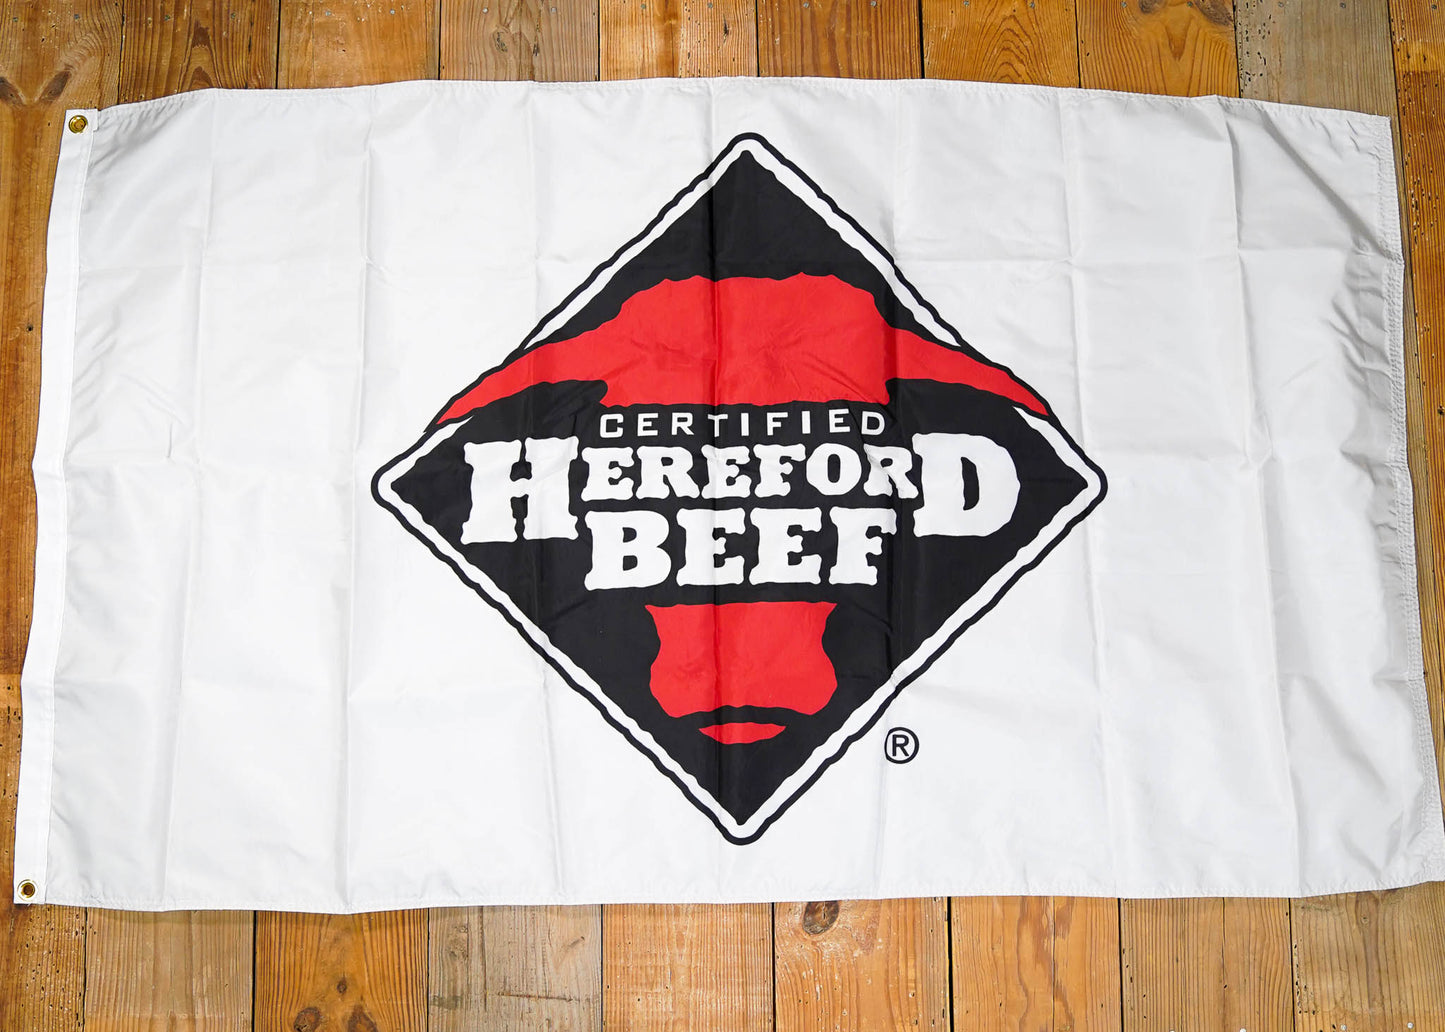 Certified Hereford Beef Flag 3'x5'